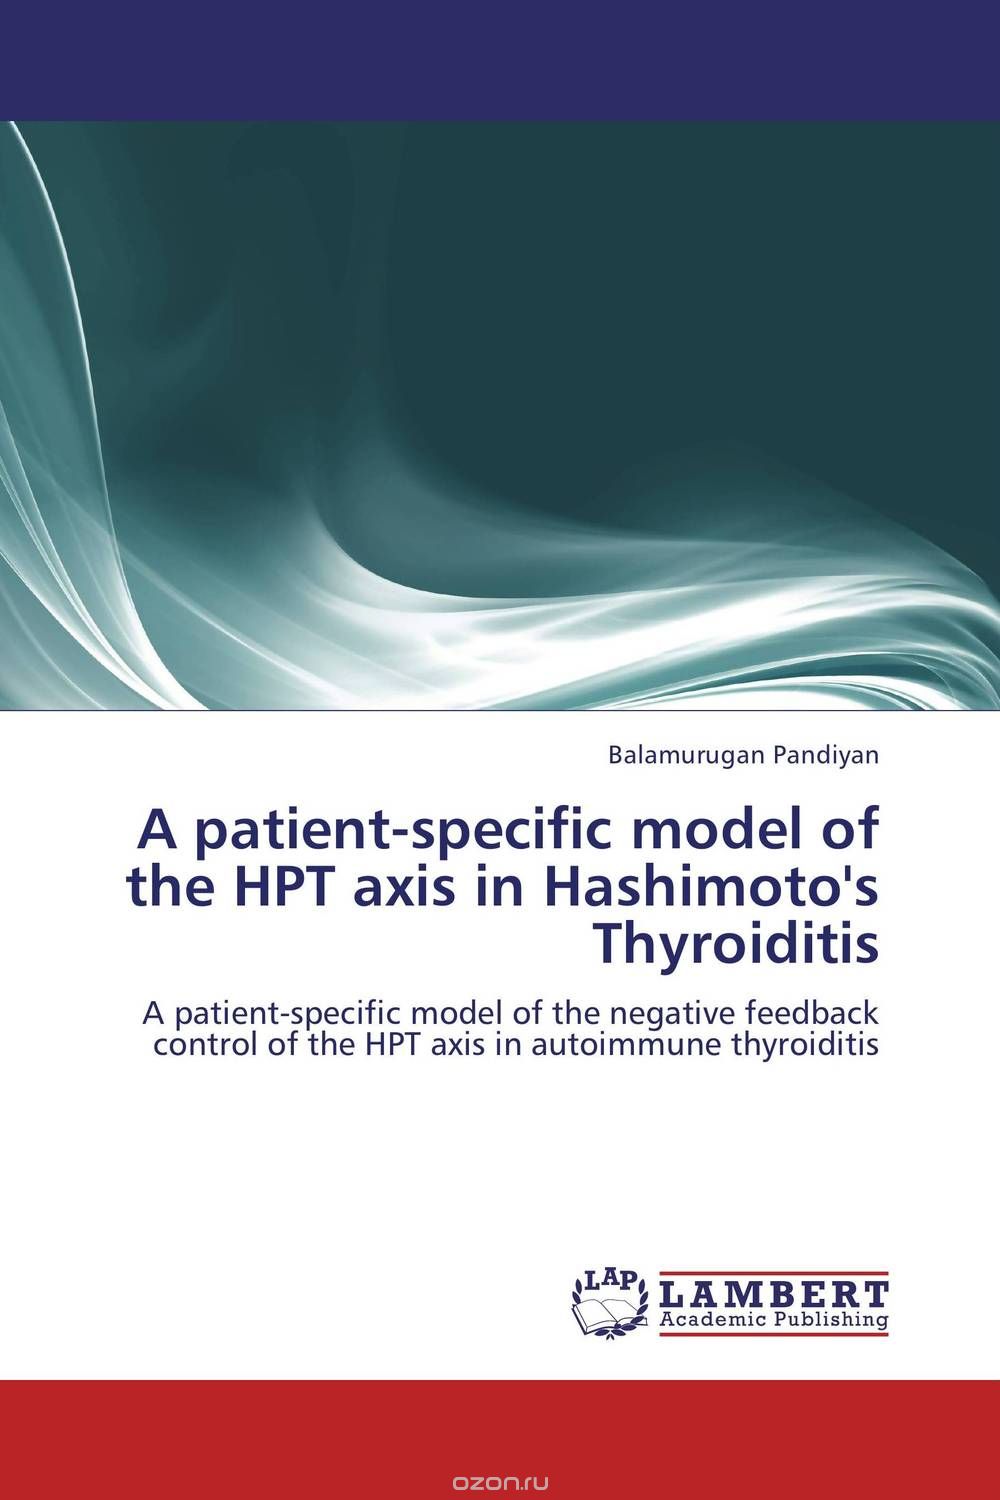 A patient-specific model of the HPT axis in Hashimoto's Thyroiditis